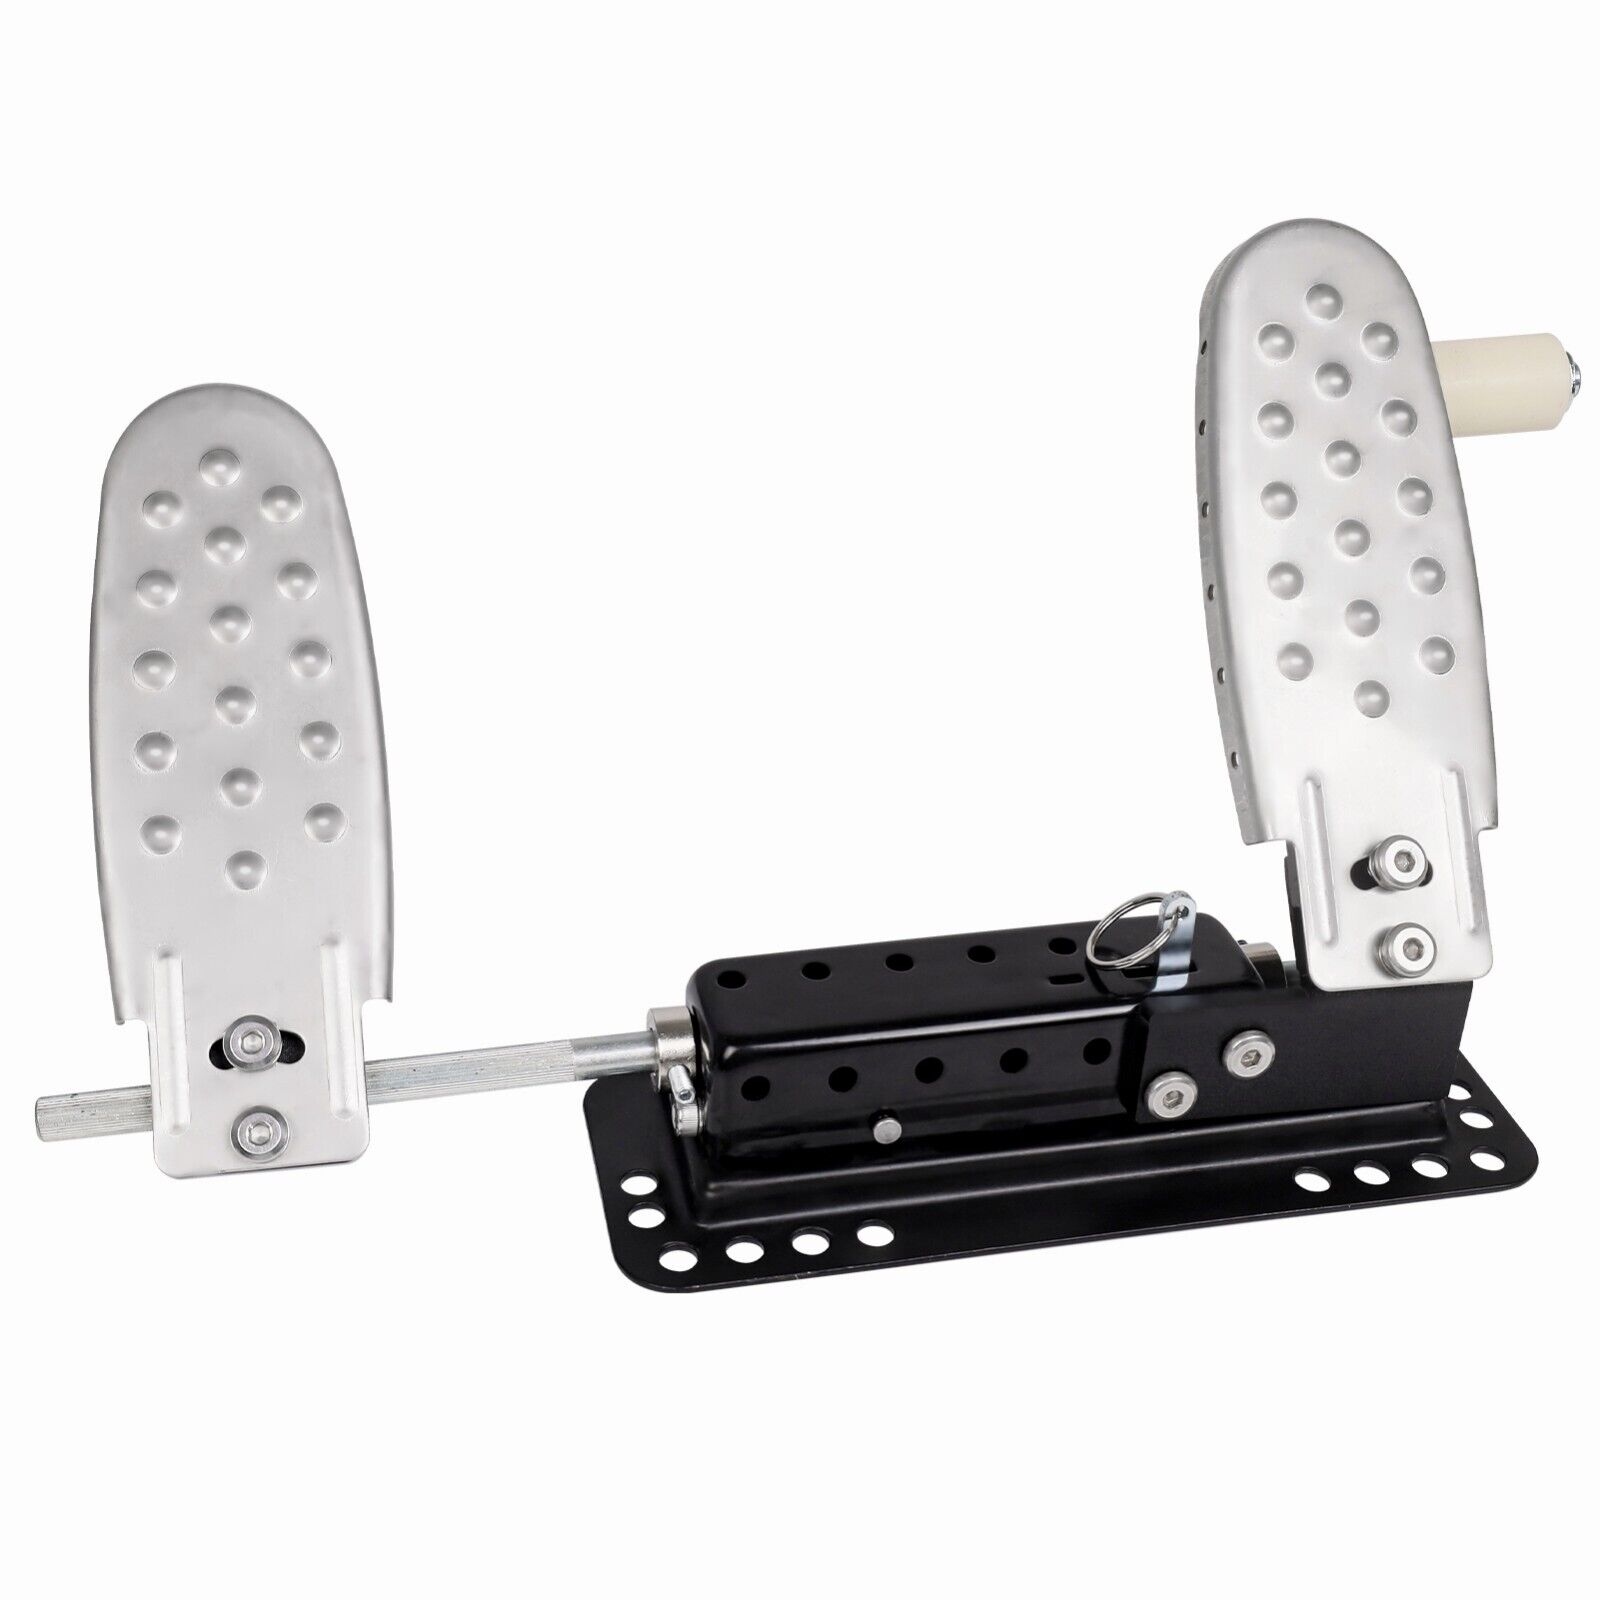 Left Foot Accelerator Gas Pedal, LFGP Drive Assist for Injured Drivers (Bolted)